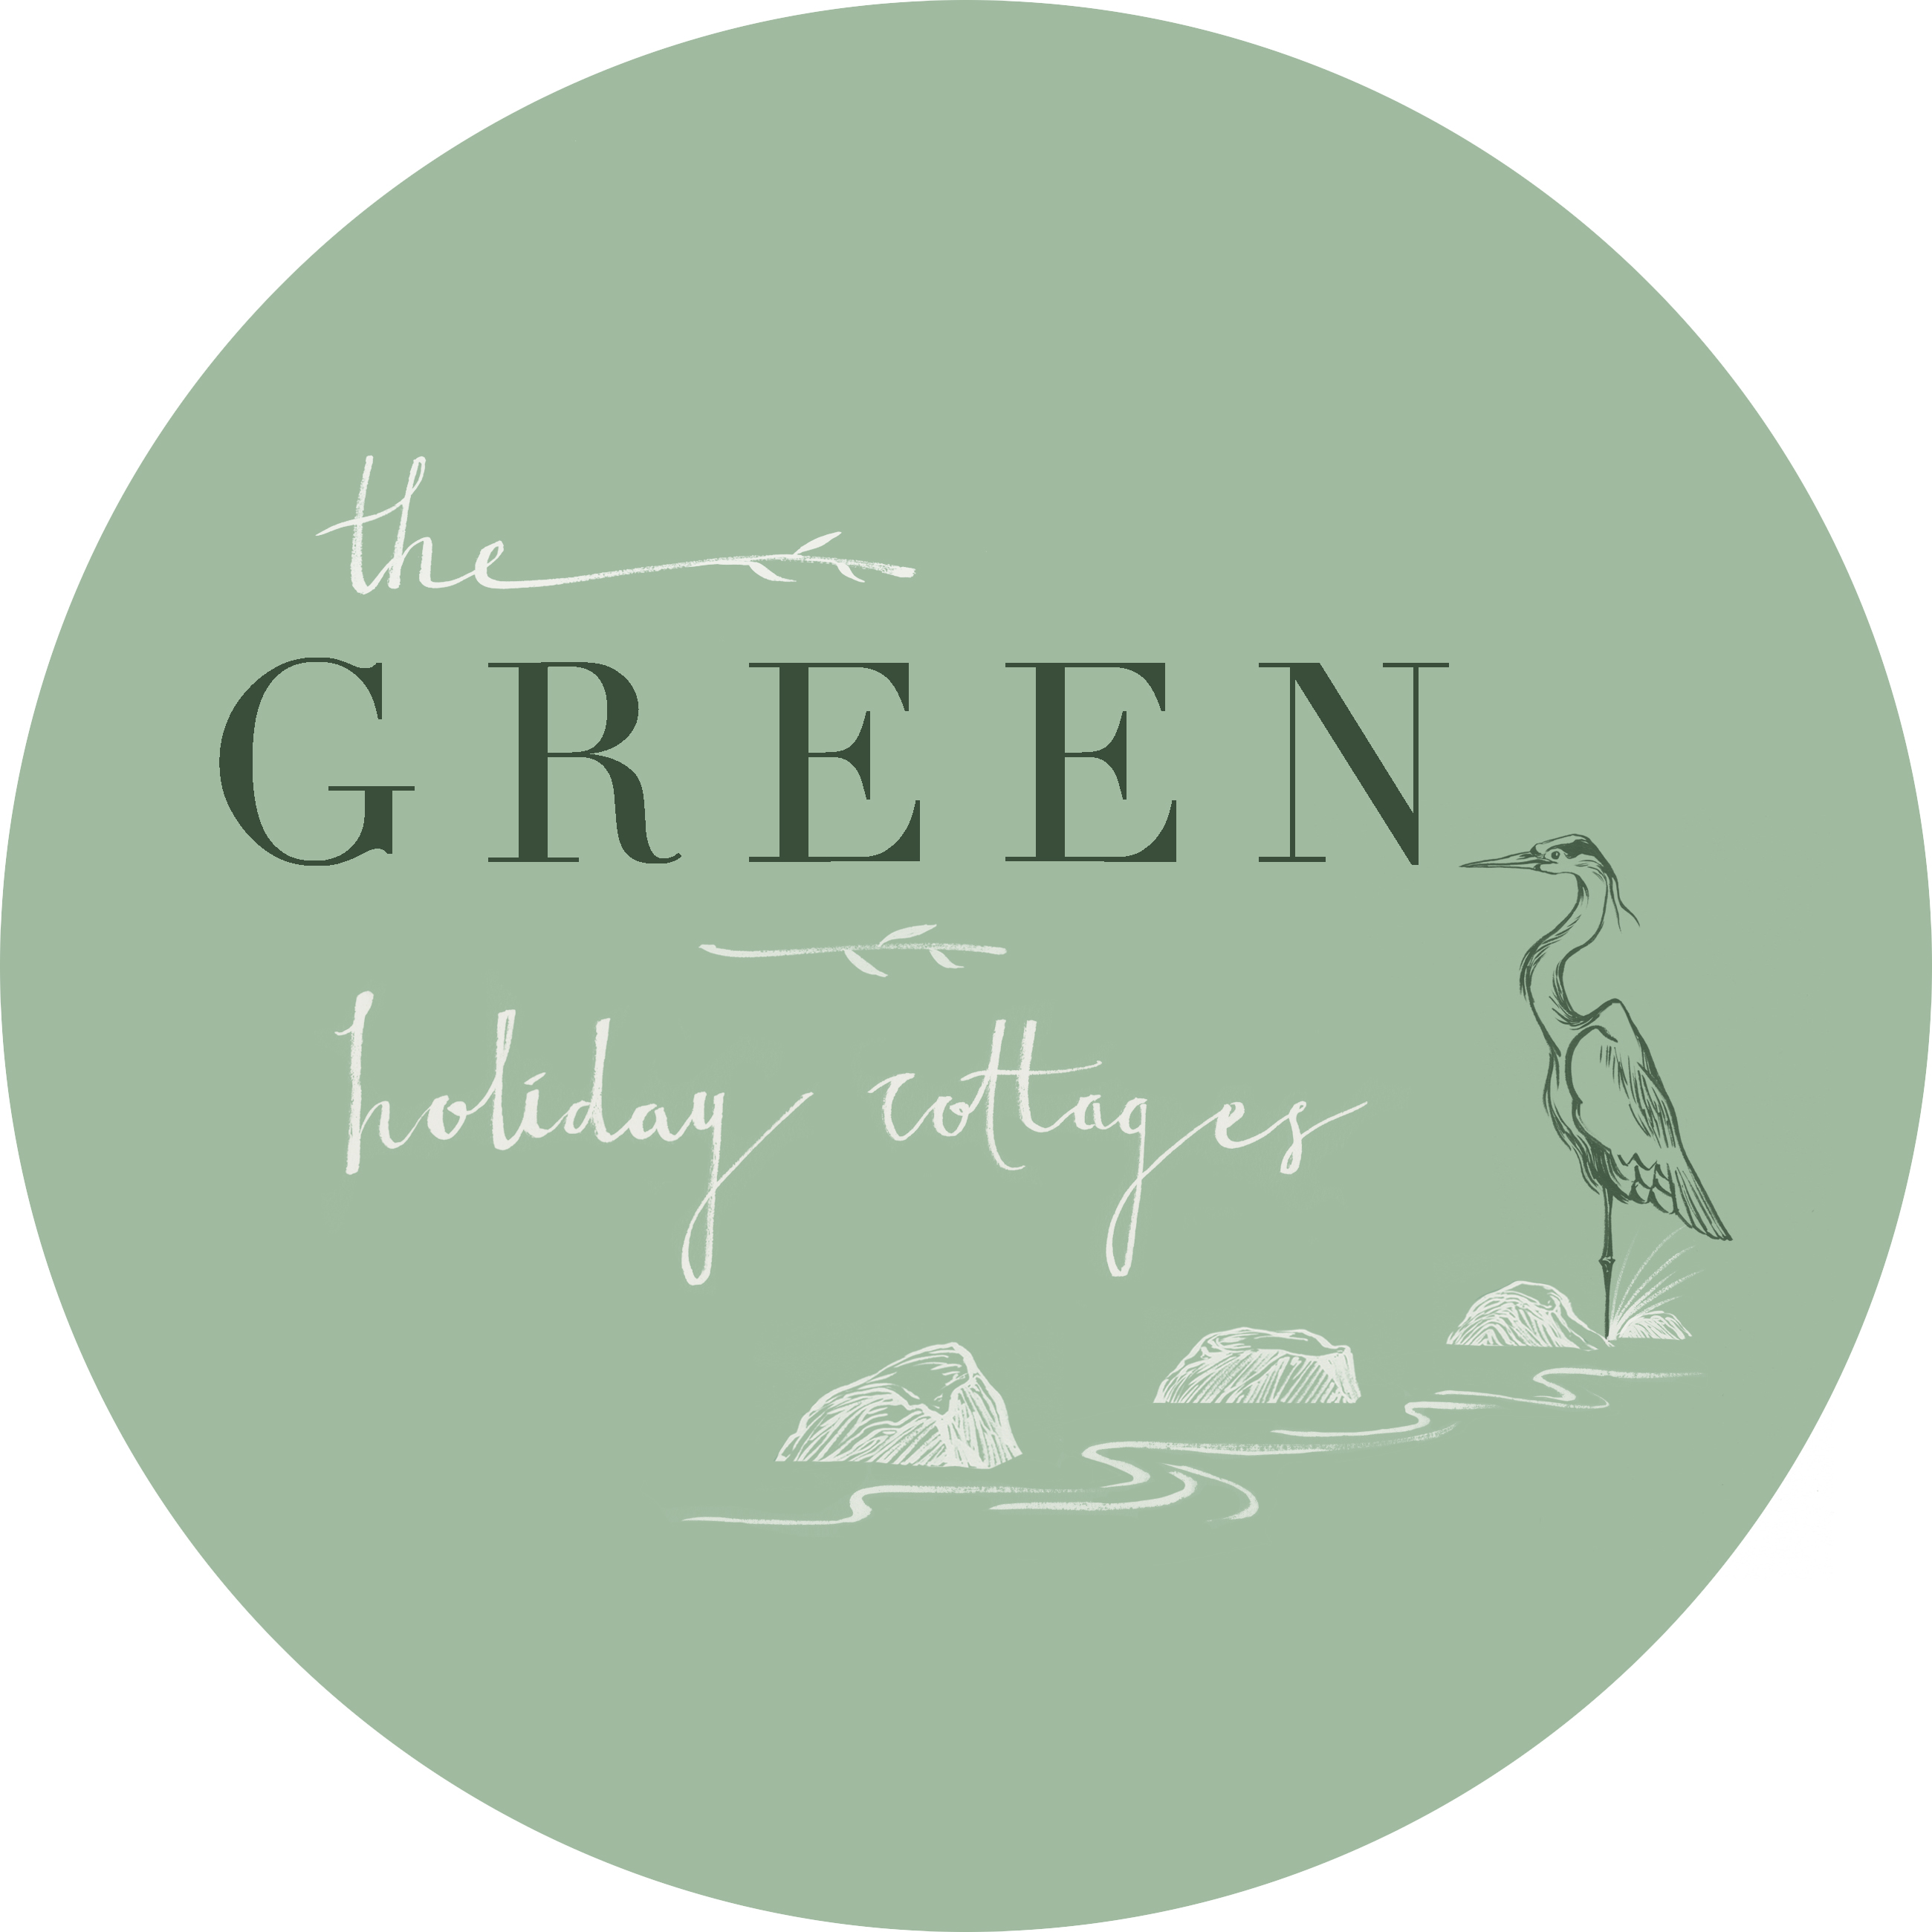 Green Holiday Cottages